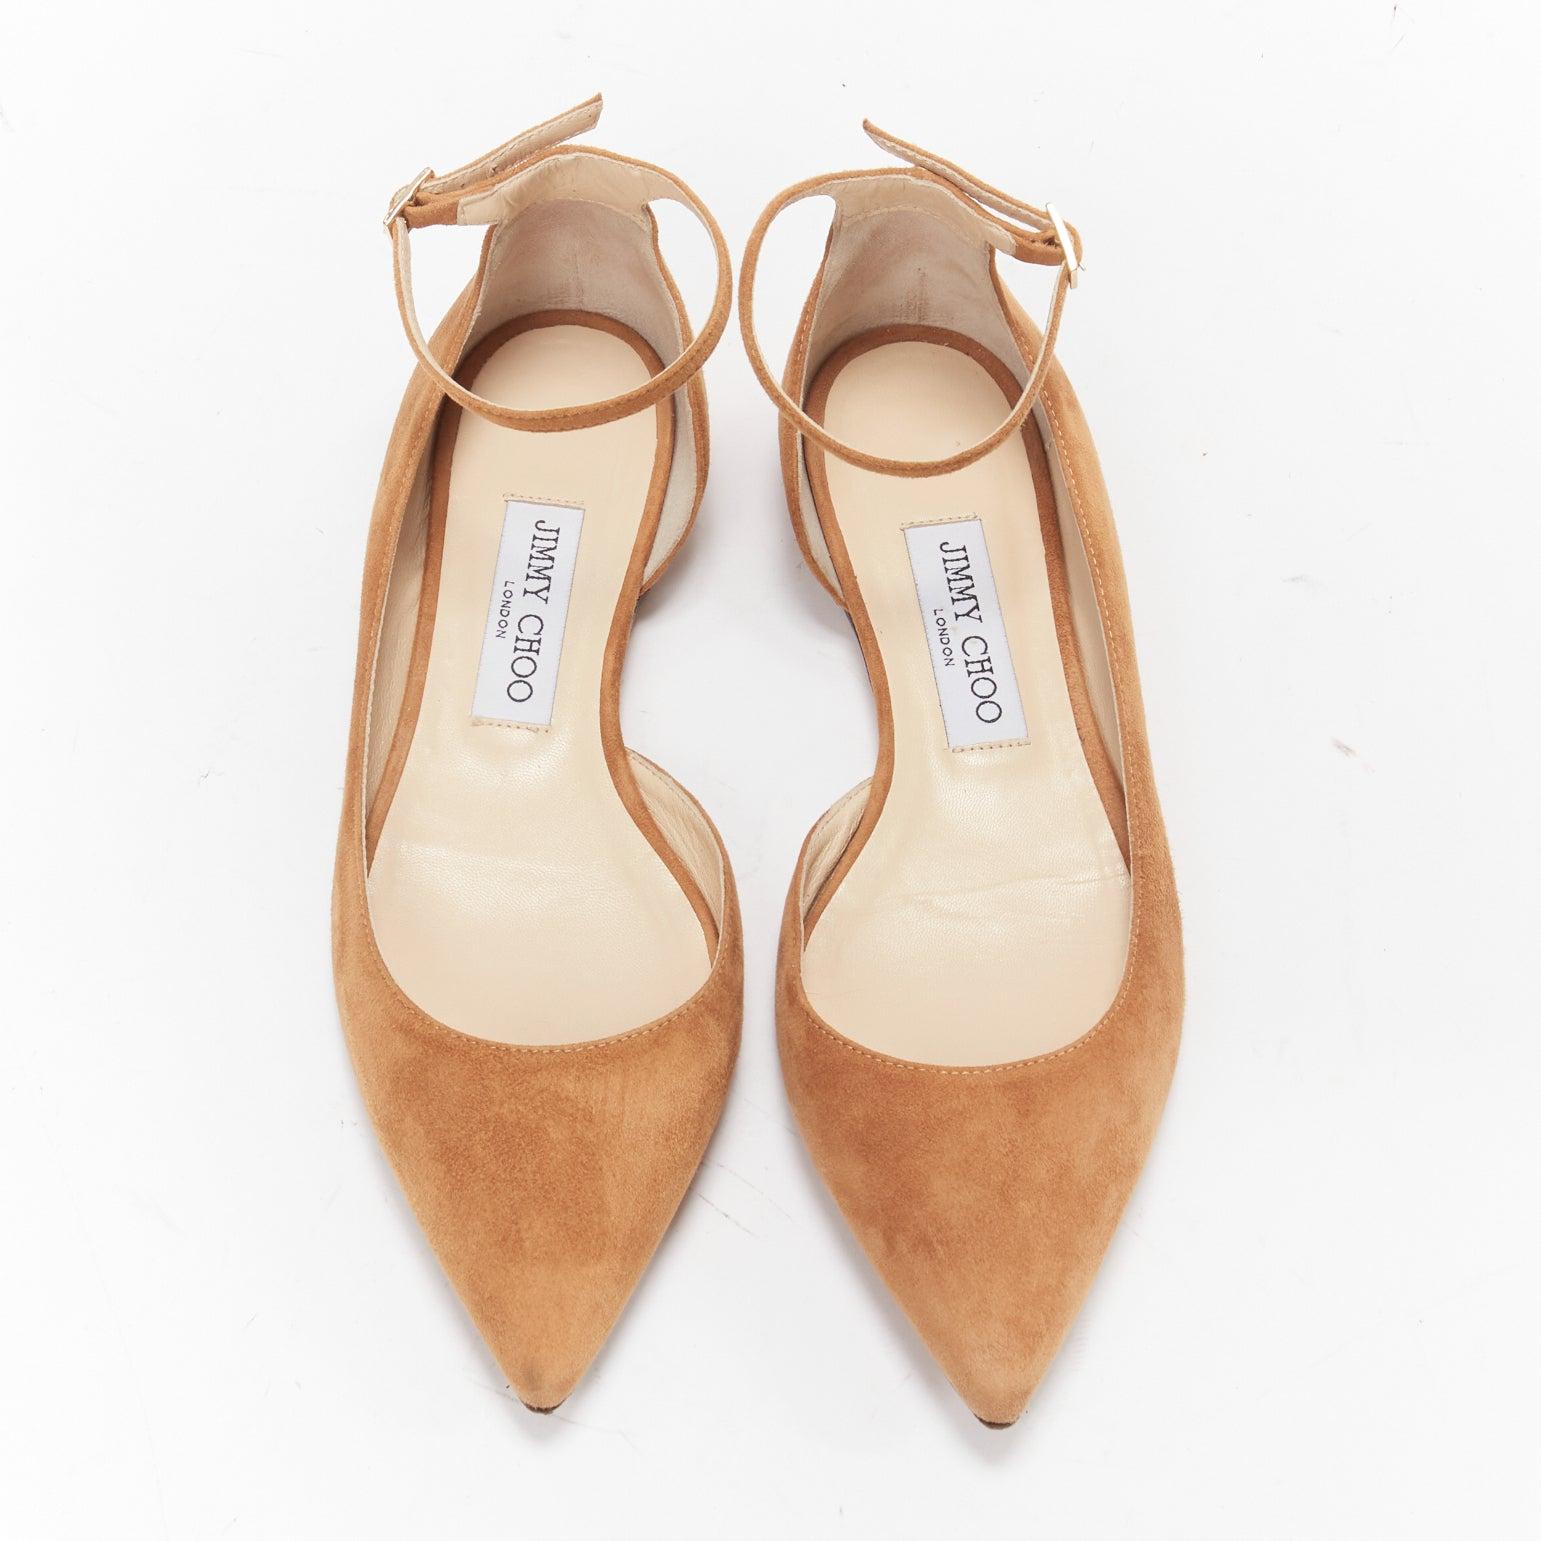 JIMMY CHOO Lucy tan brown suede ankle strap point toe half dorsay flats EU37.5
Reference: LNKO/A02198
Brand: Jimmy Choo
Model: Lucy
Material: Leather
Color: Tan Brown
Pattern: Solid
Closure: Ankle Strap
Lining: Beige Leather
Made in: